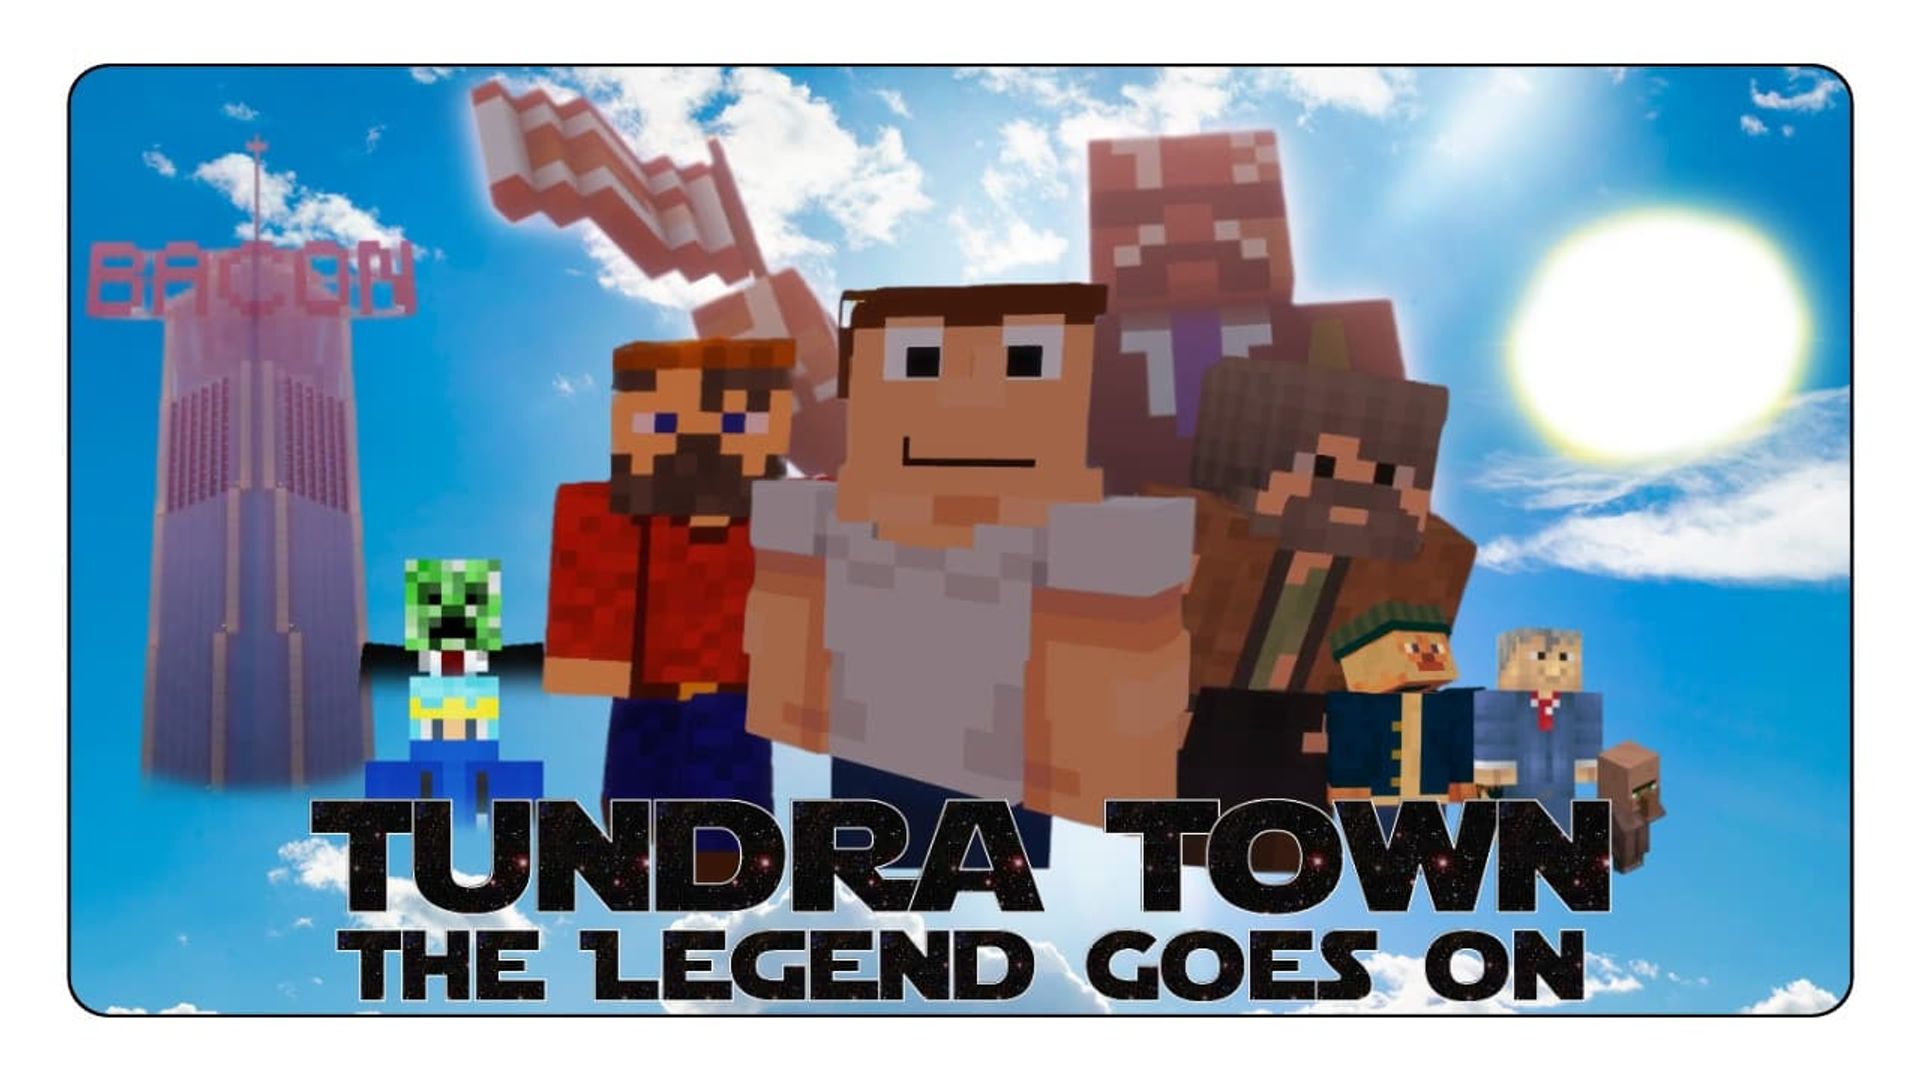 Tundra Town: The Legend Goes On background